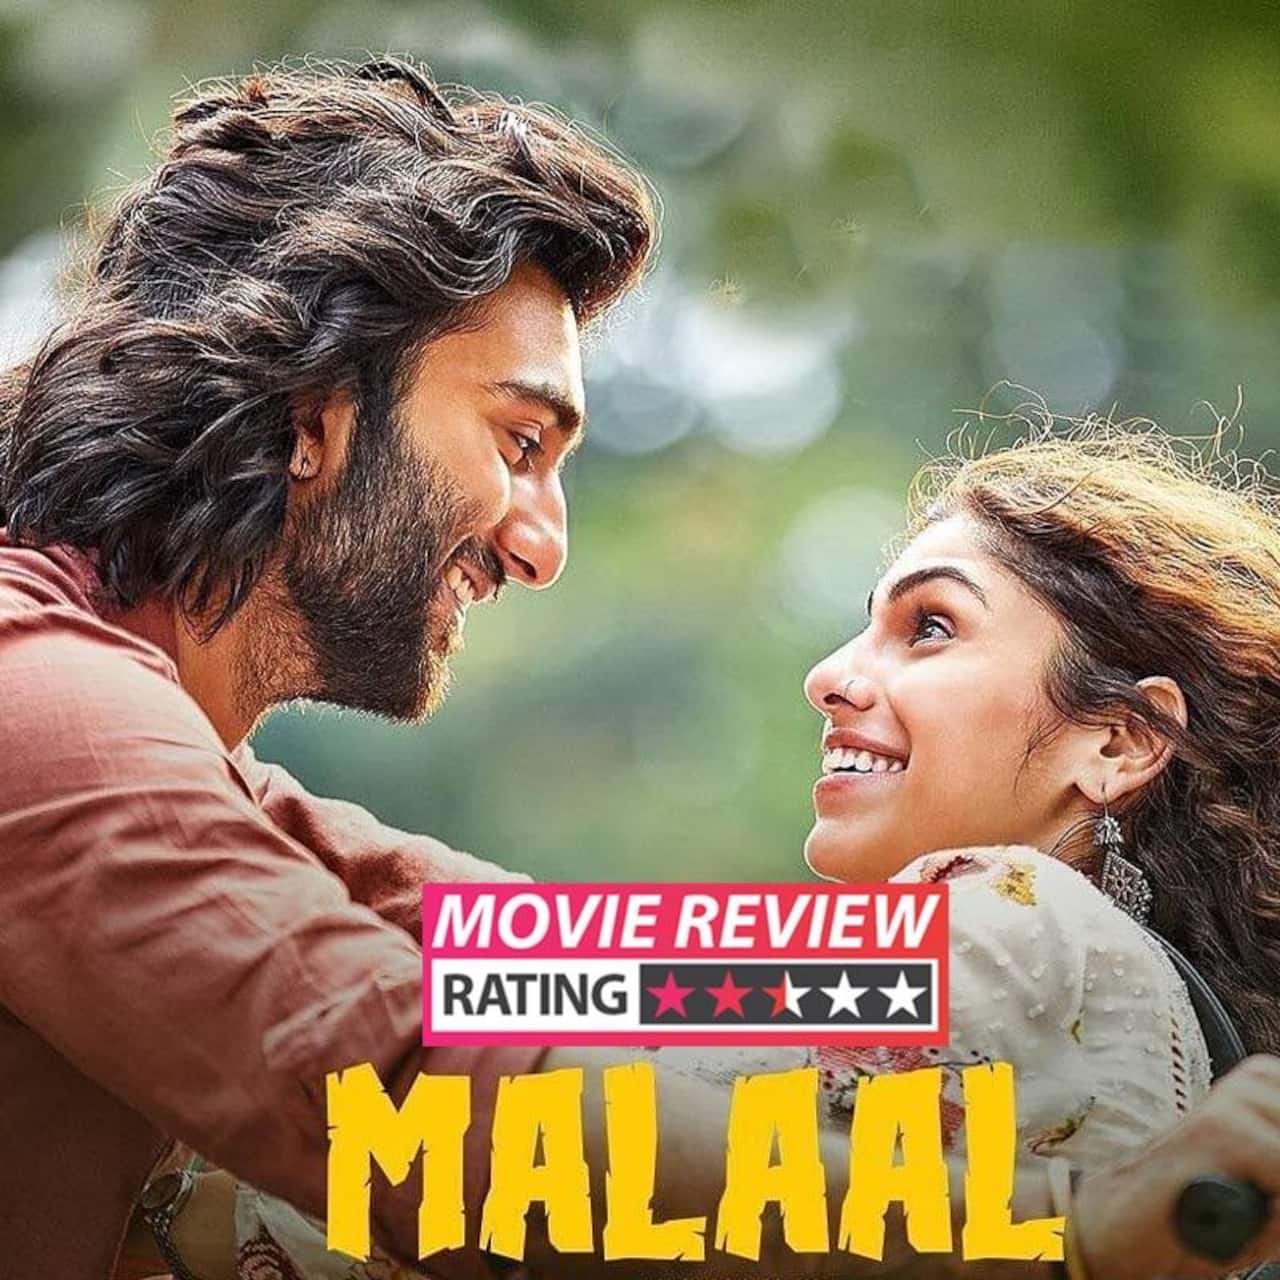 Malaal movie review: Meezan Jaaferi's maiden act stands out in this ...